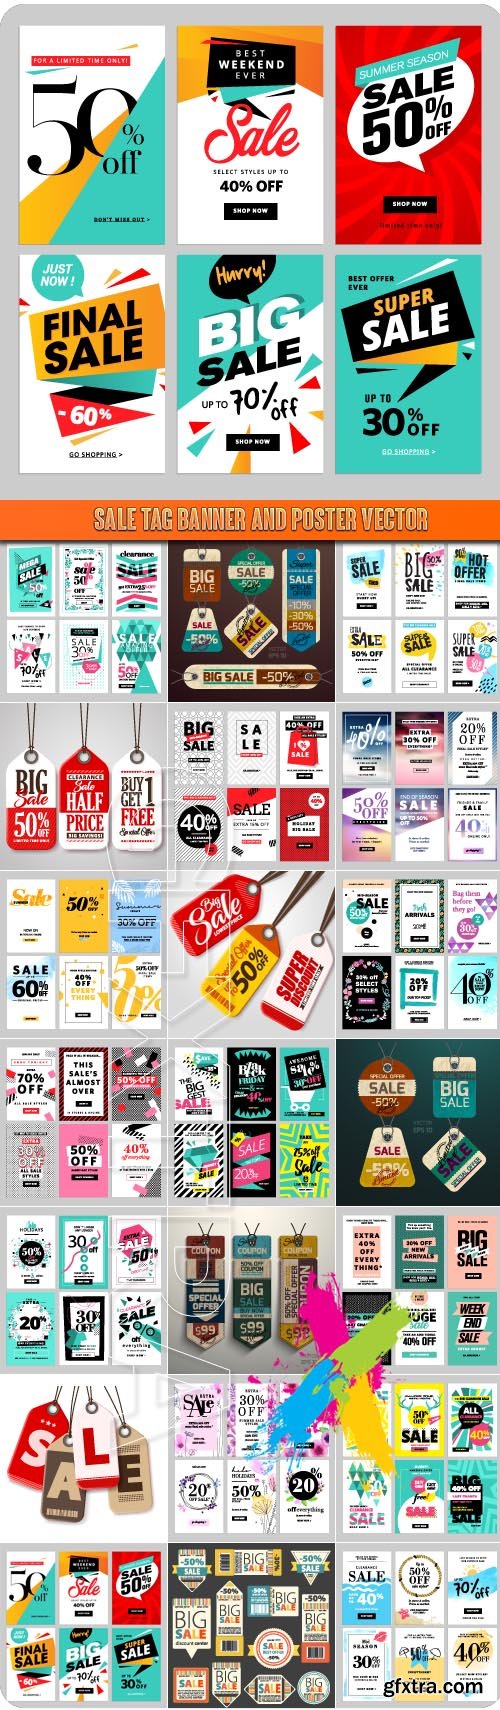 Sale tag banner and poster vector